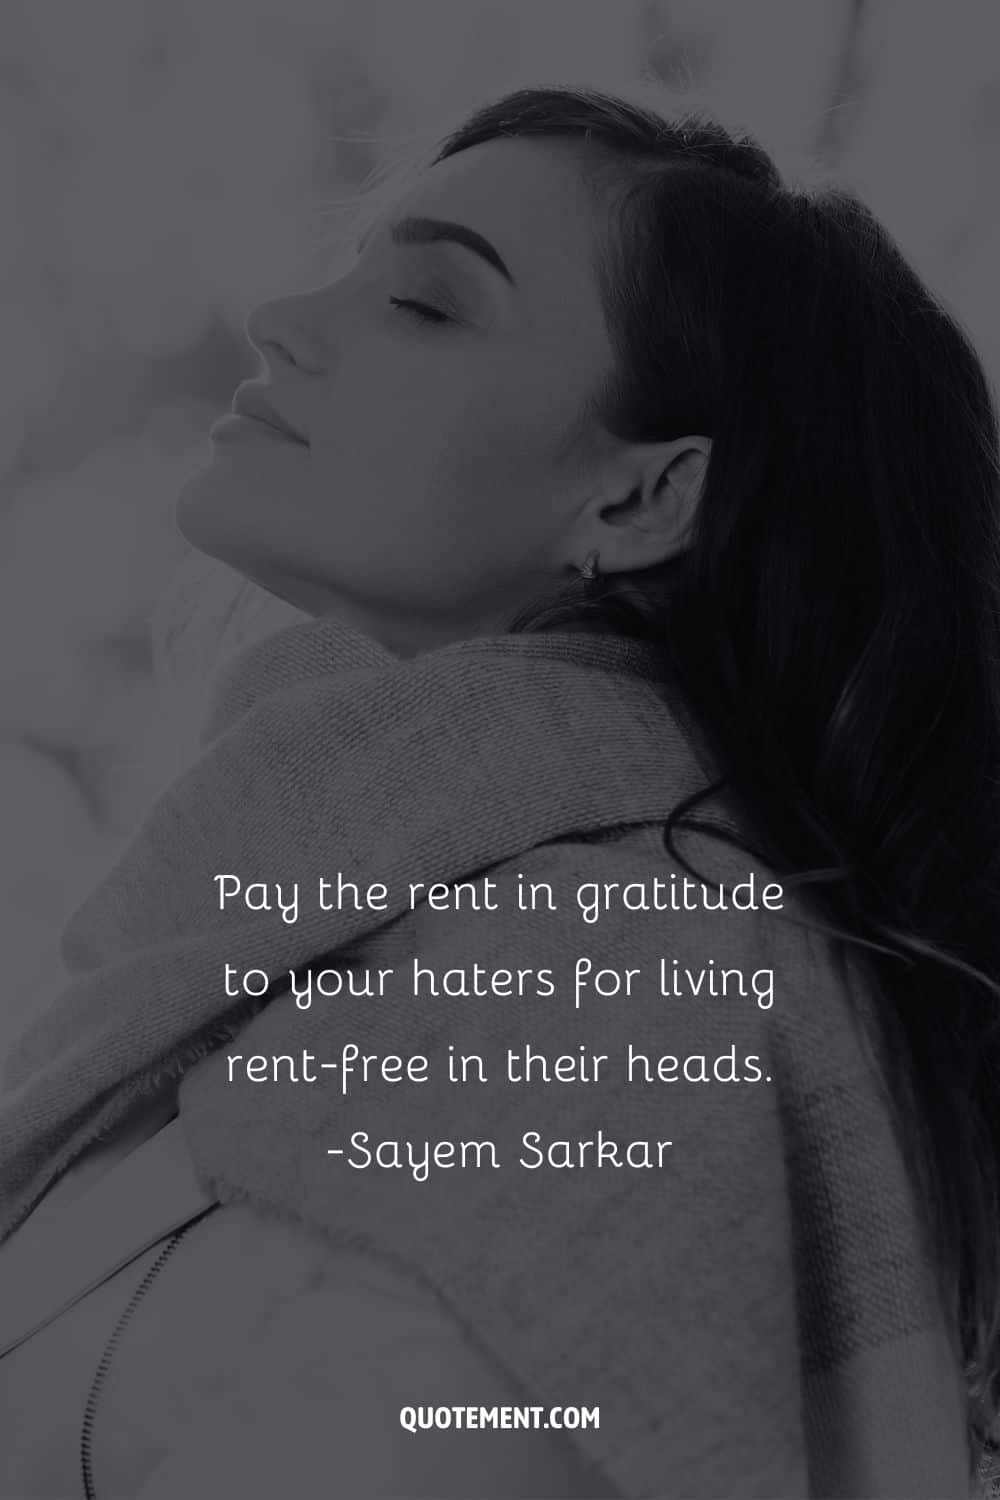 Pay the rent in gratitude to your haters for living rent-free in their heads